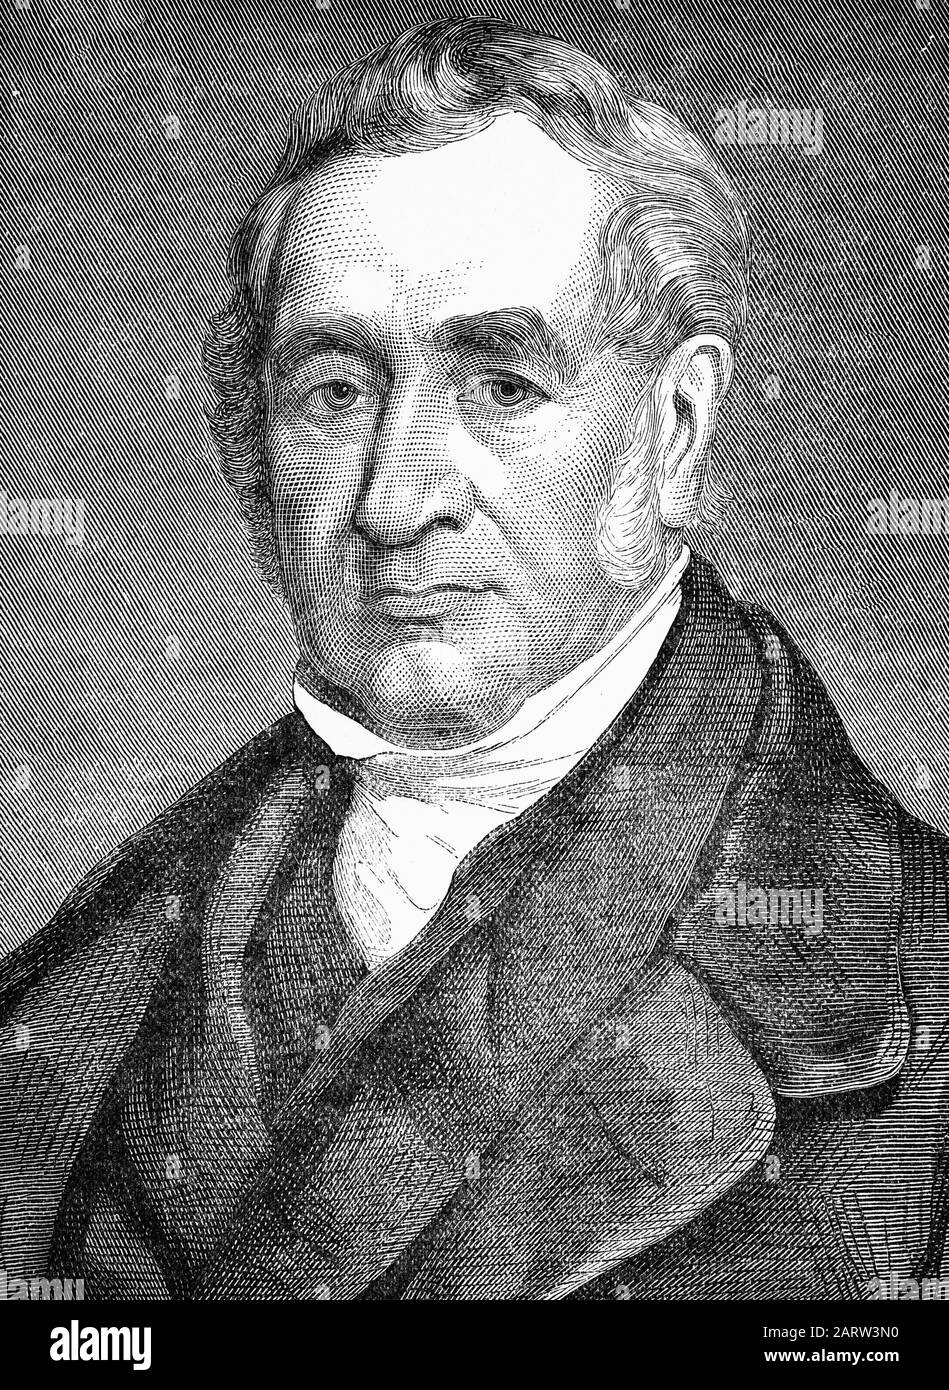 A portrait of George Stephenson (1781-1848), a British civil engineer and mechanical engineer. Renowned as the 'Father of Railways', he pioneered rail transport was one of the most important technological inventions of the 19th century and a key component of the Industrial Revolution. Built by George and his son Robert's company Robert Stephenson and Company, the Locomotion No. 1 was the first steam locomotive to carry passengers on a public rail line, the Stockton and Darlington Railway in 1825. George also built the first public inter-city railway line - the Liverpool and Manchester Railway. Stock Photo